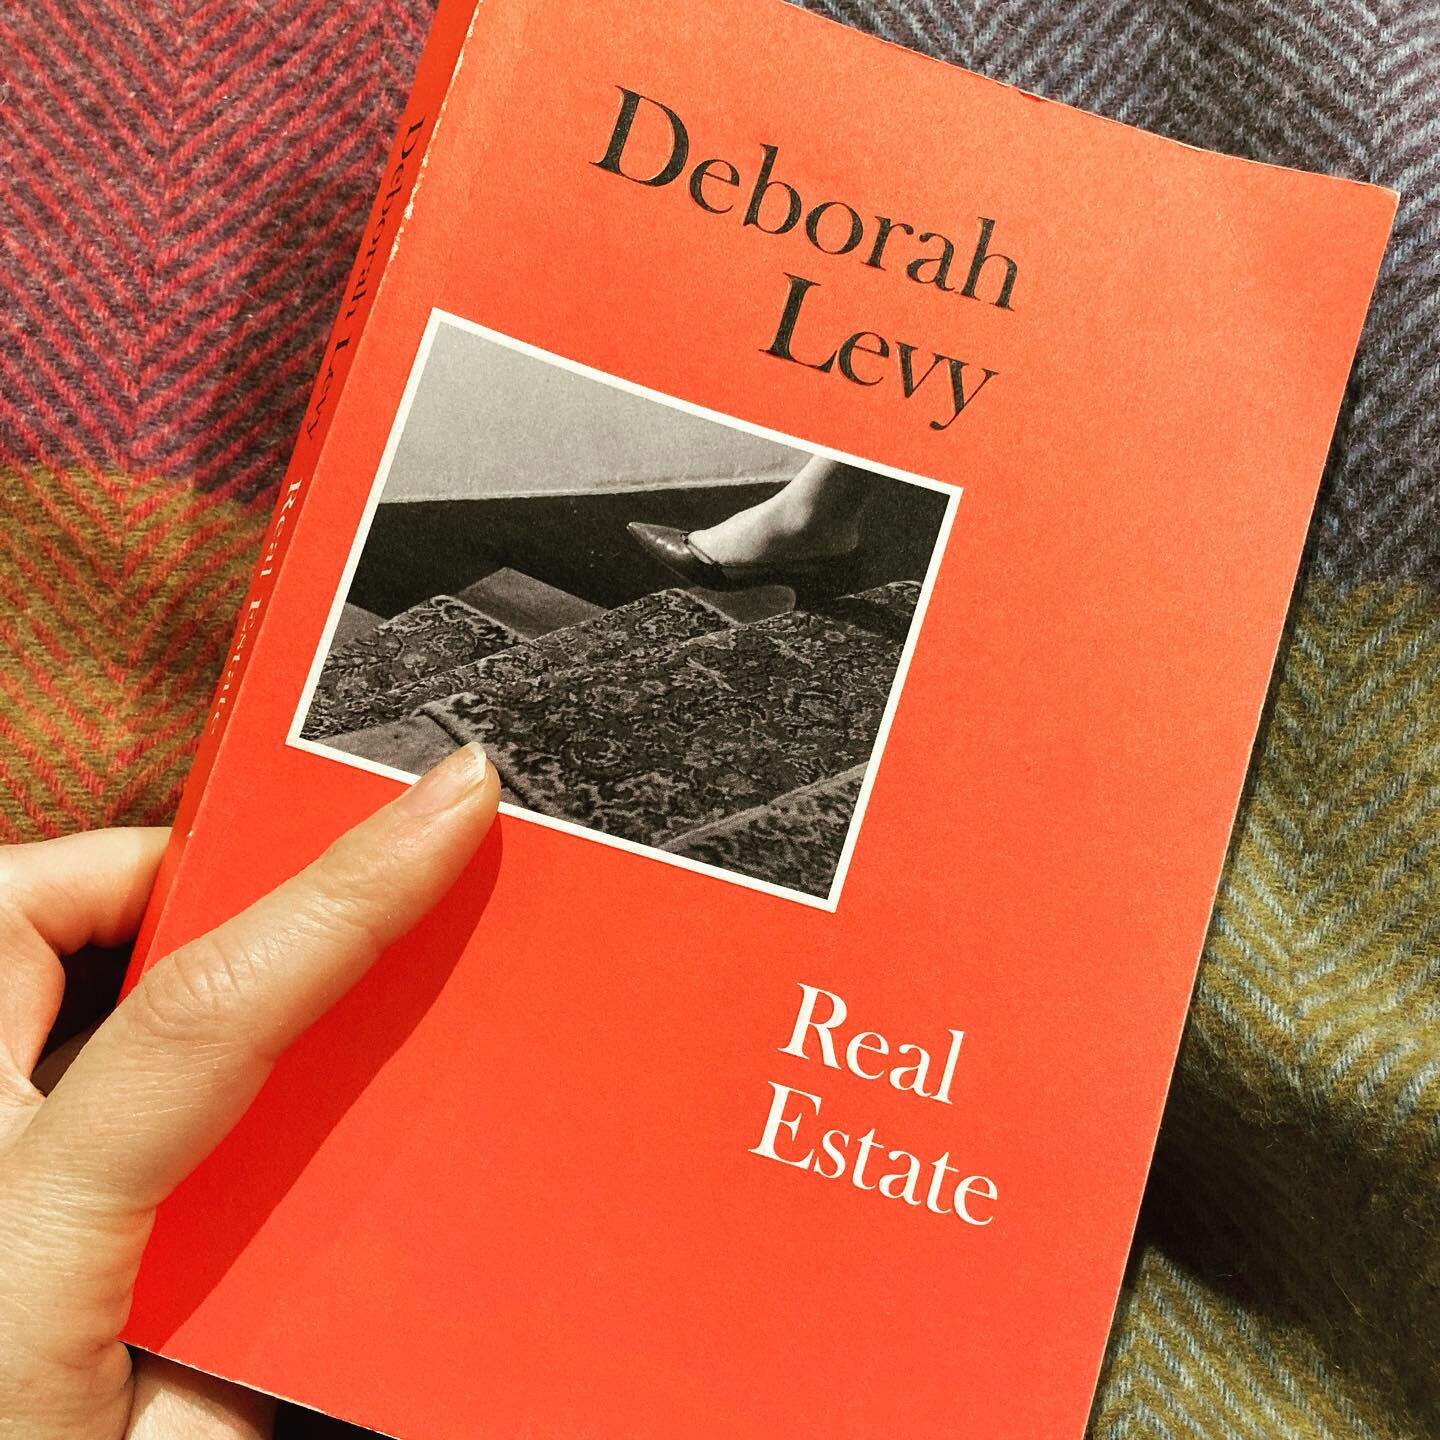 The last in Deborah Levy&rsquo;s autobiographical trilogy. Such a wonderful philosophical and personal read. Felt like having a really wonderful, insightful conversation. Books feel like pals sometimes, even when the author is a complete stranger ❤️